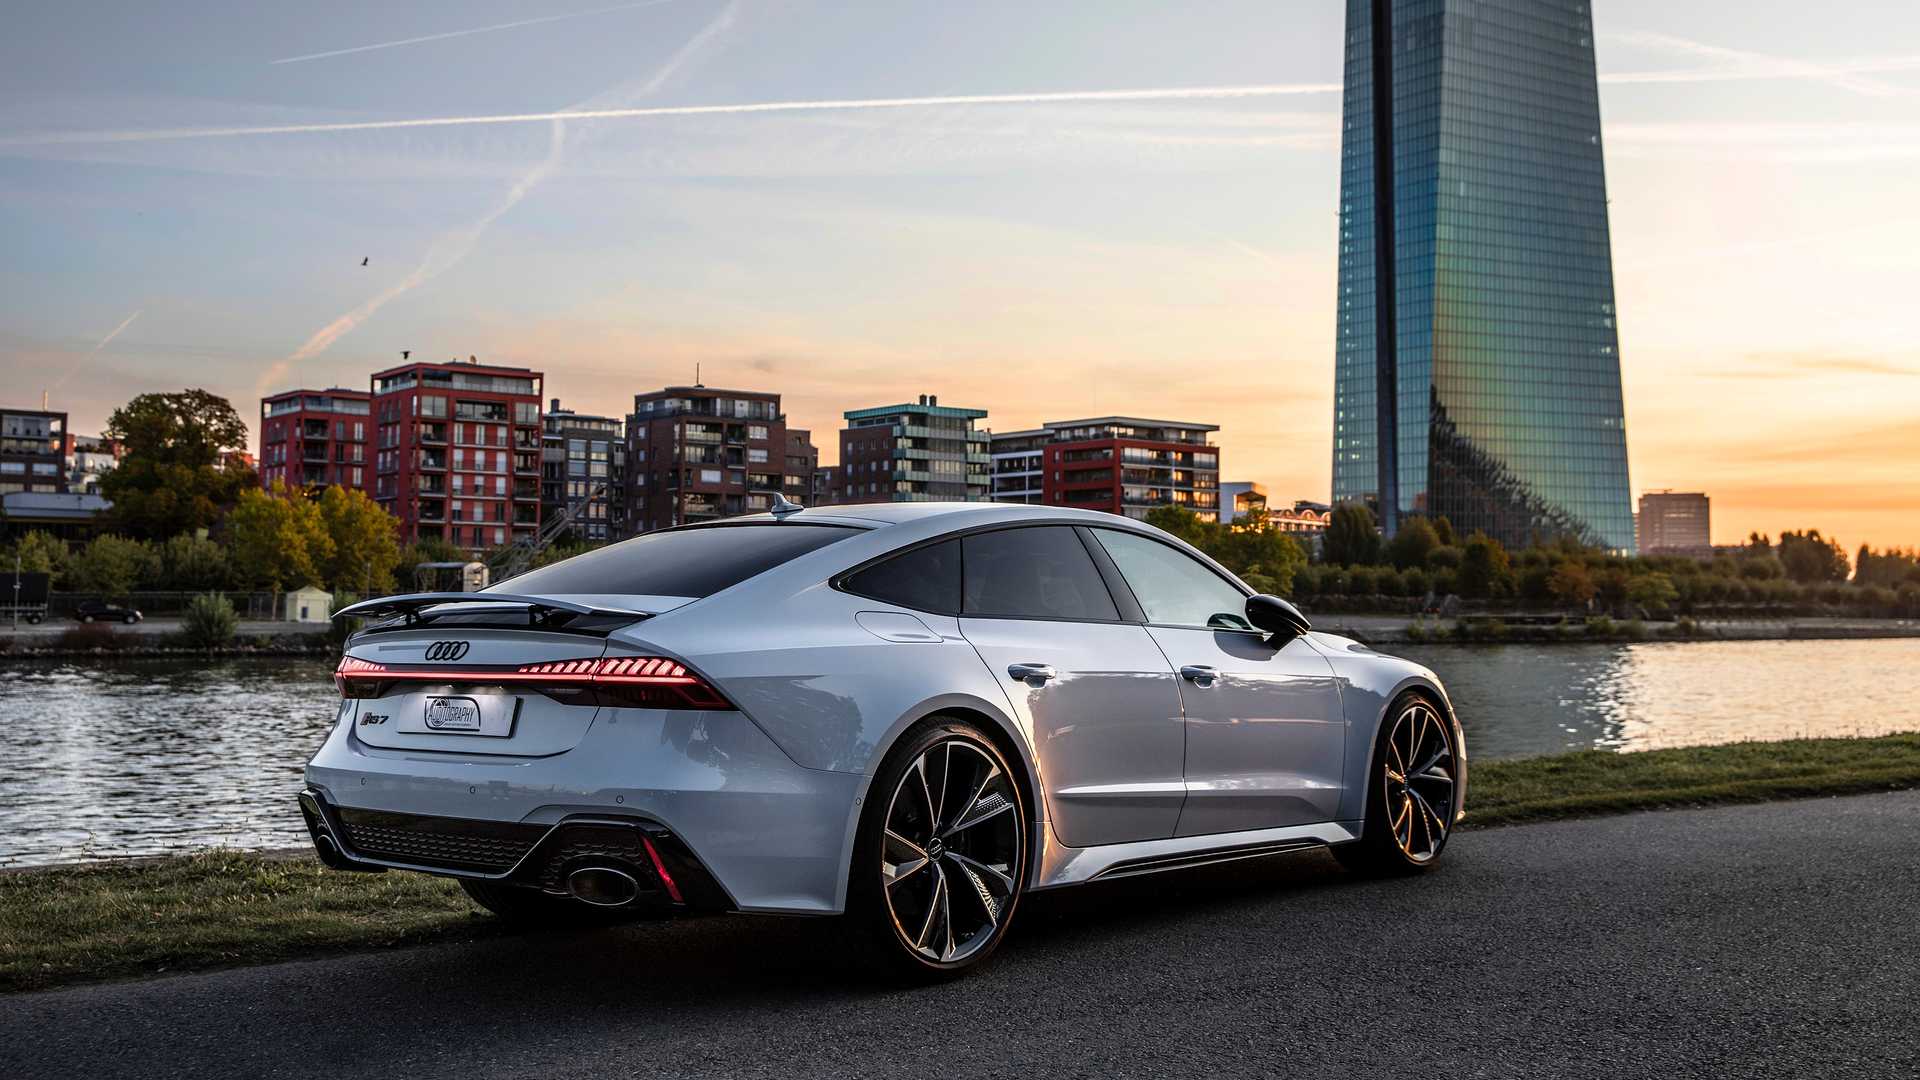 See The 2020 Audi RS7 Sportback Hit 62 MPH In 3.4 Seconds